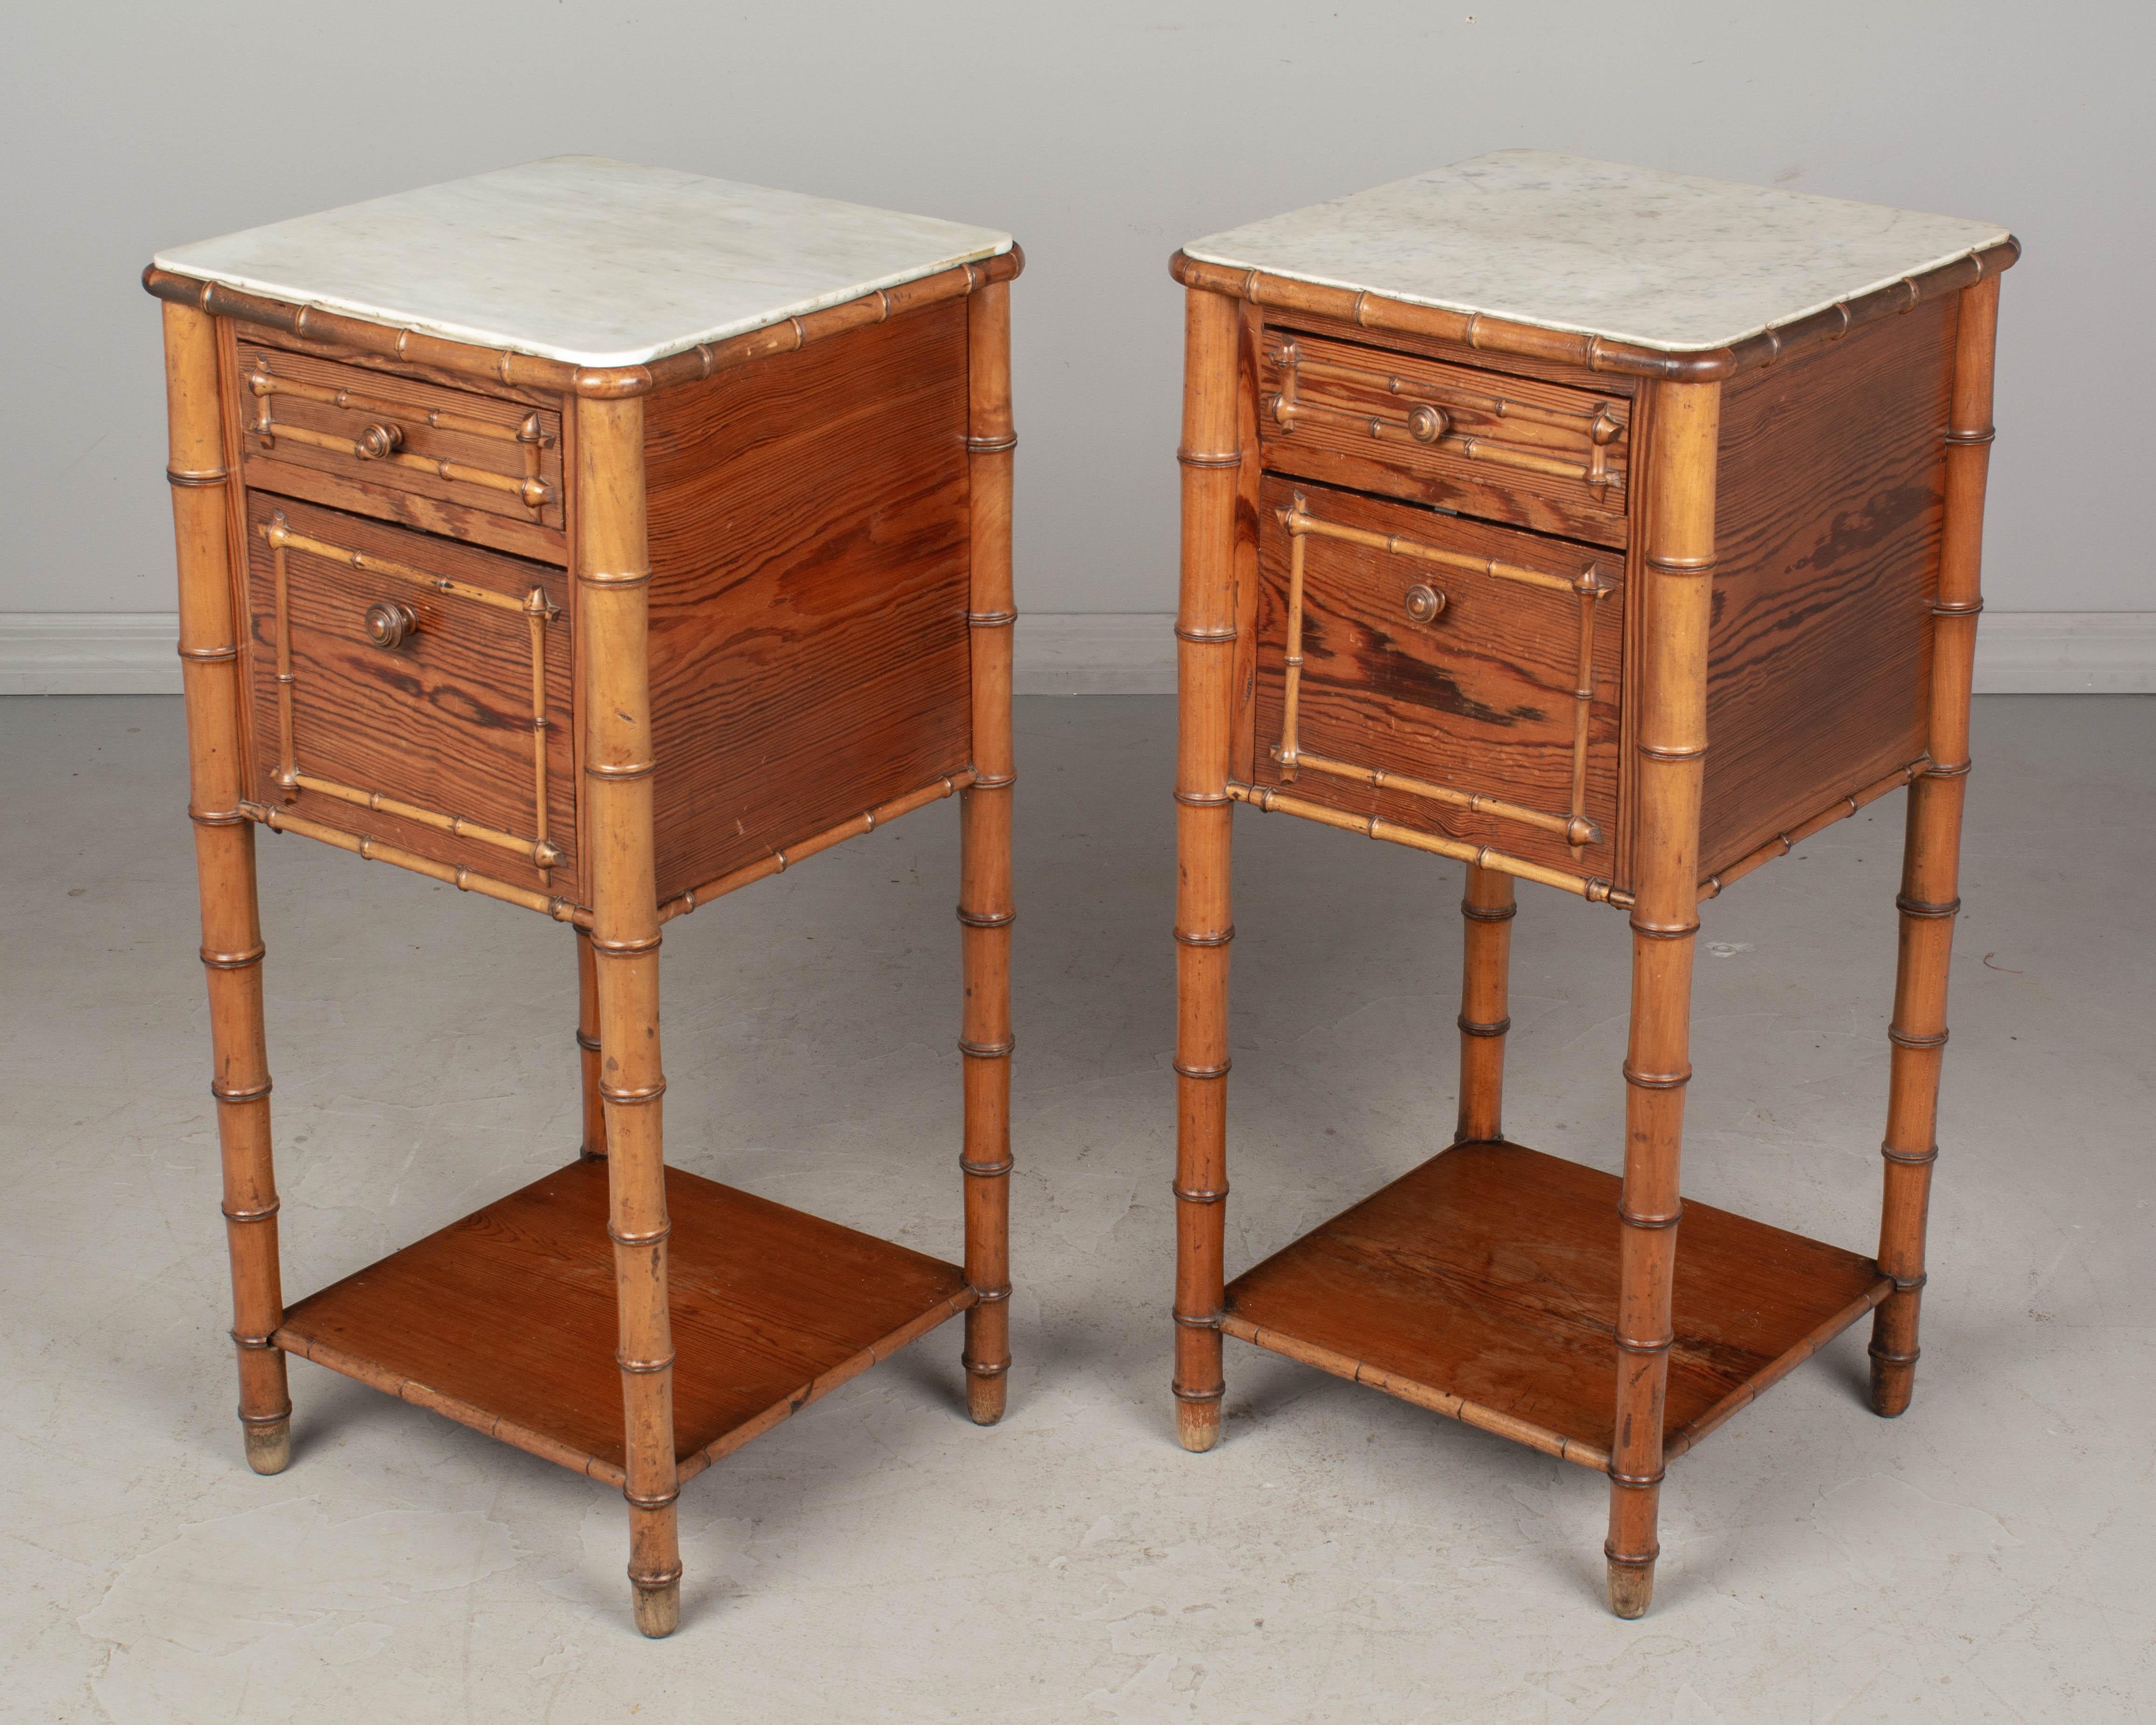 A pair of 19th century French faux bamboo bedside tables, or nightstands, made of cherry and pine. Each with a dovetailed drawer and a door that hinges open to reveal a marble lined interior compartment, once used to store a chamber pot. Turned